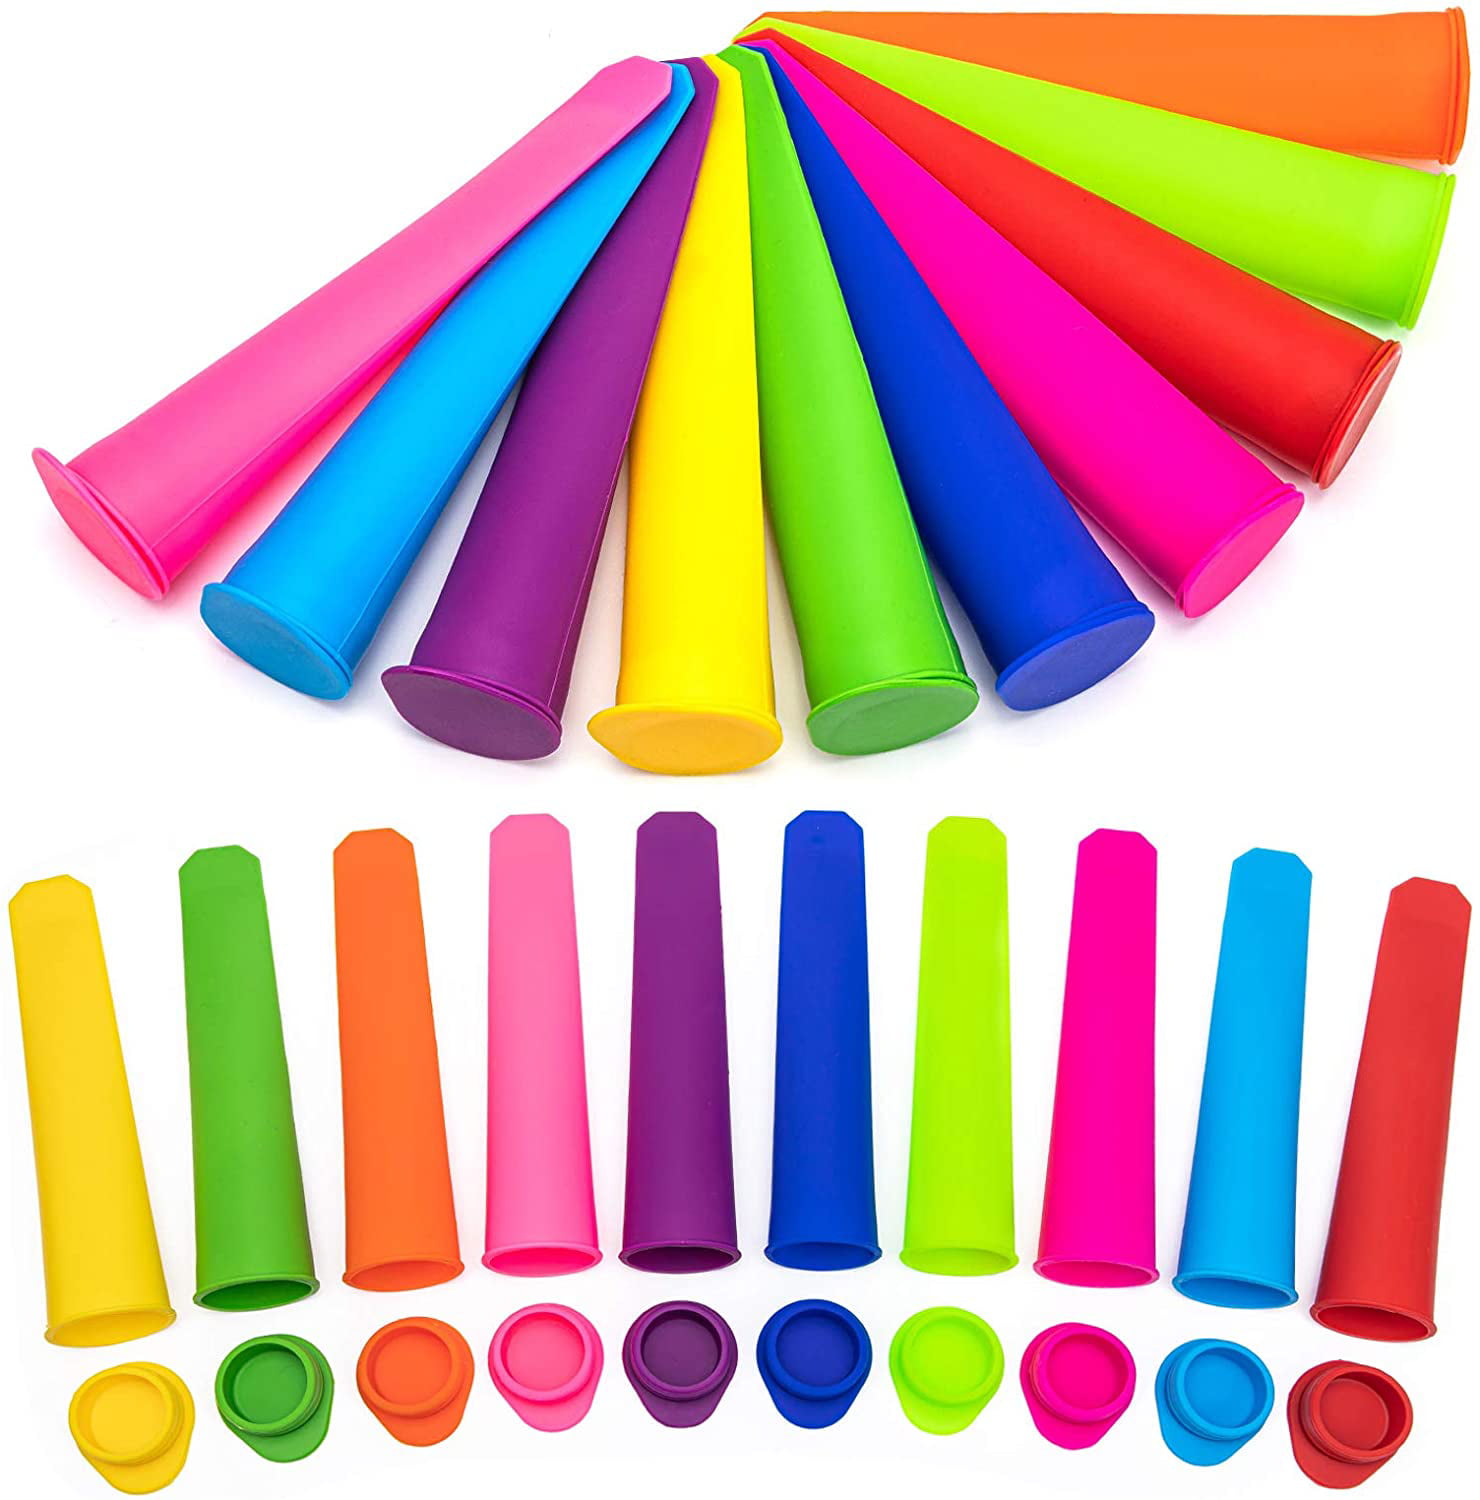 10 Pcs Silicone Ice Popsicle Molds with Lids Pop Molds Multi Colors